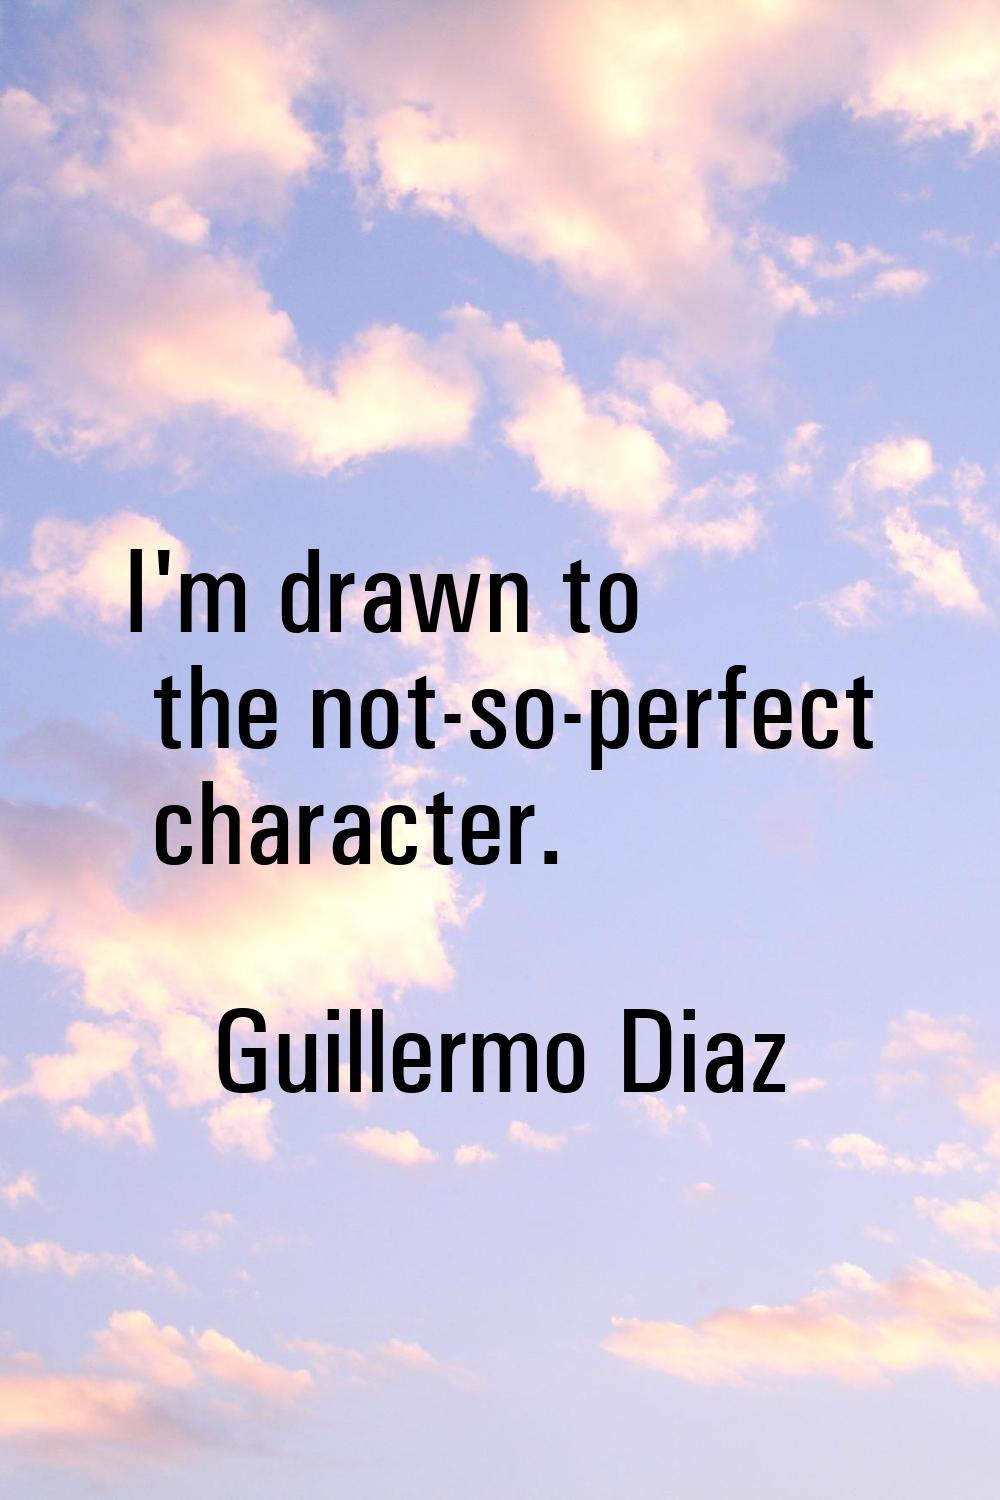 I'm drawn to the not-so-perfect character.